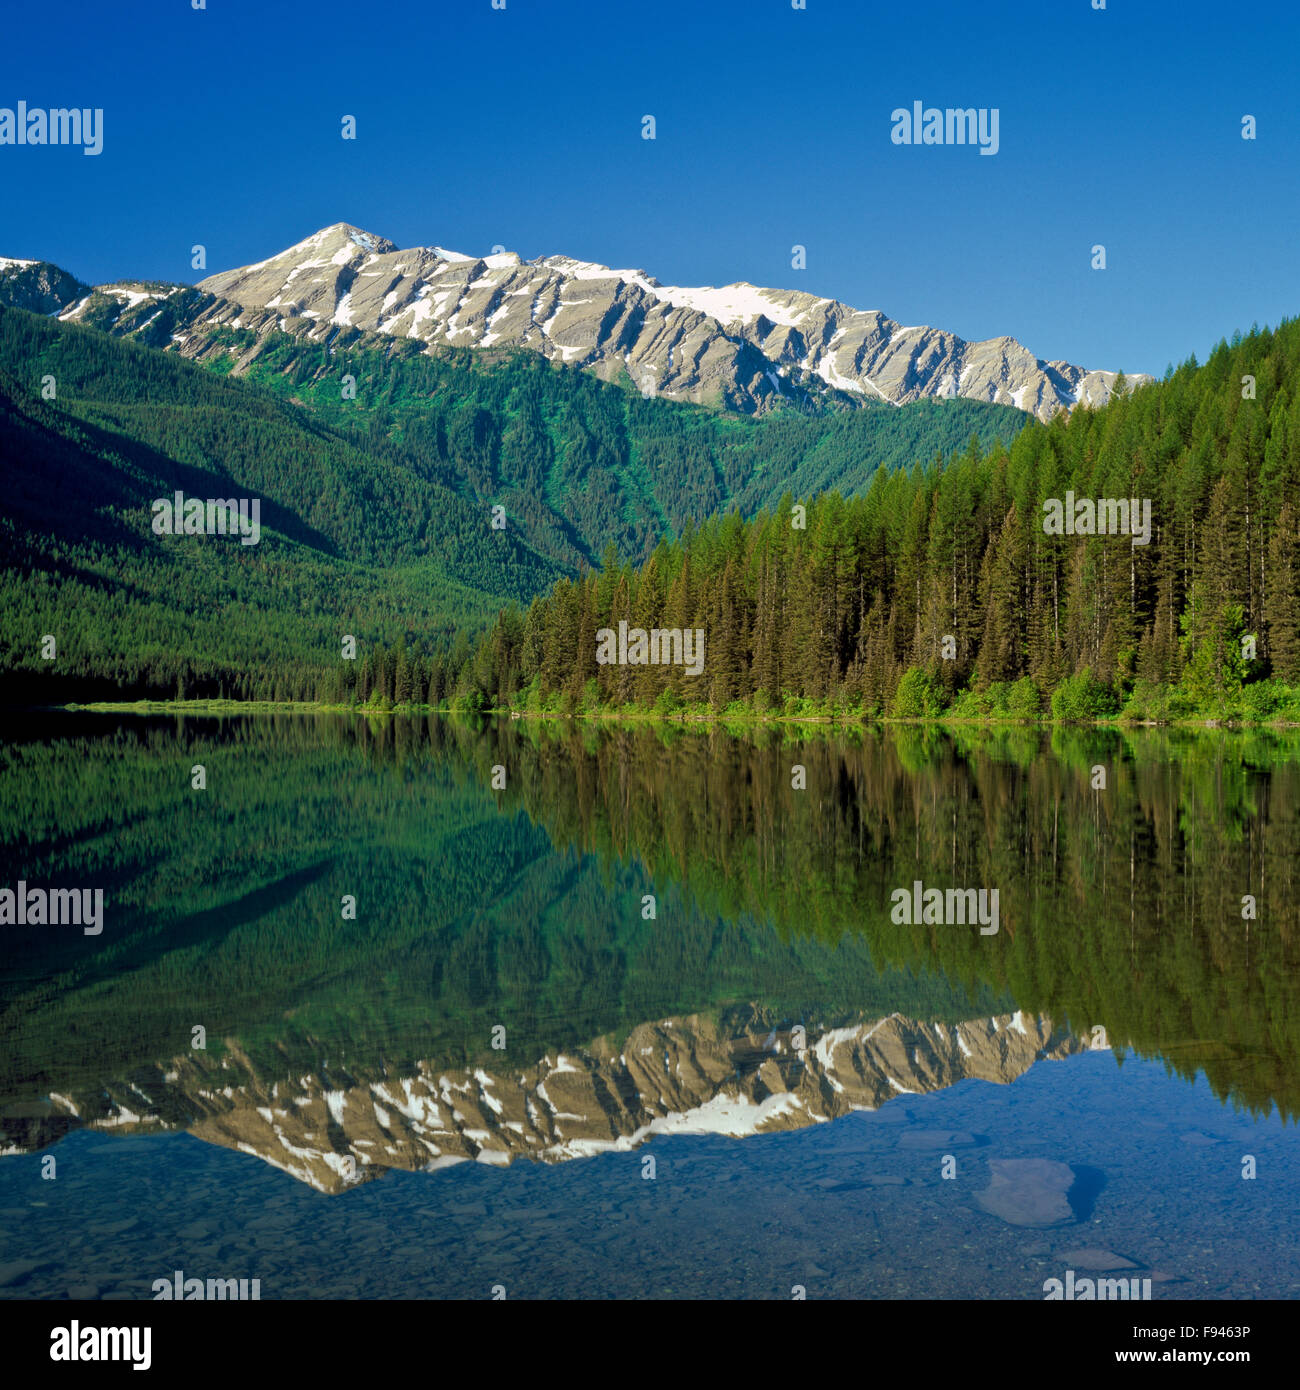 great northern mountain reflected in stanton lake in the great bear wilderness near essex, montana Stock Photo